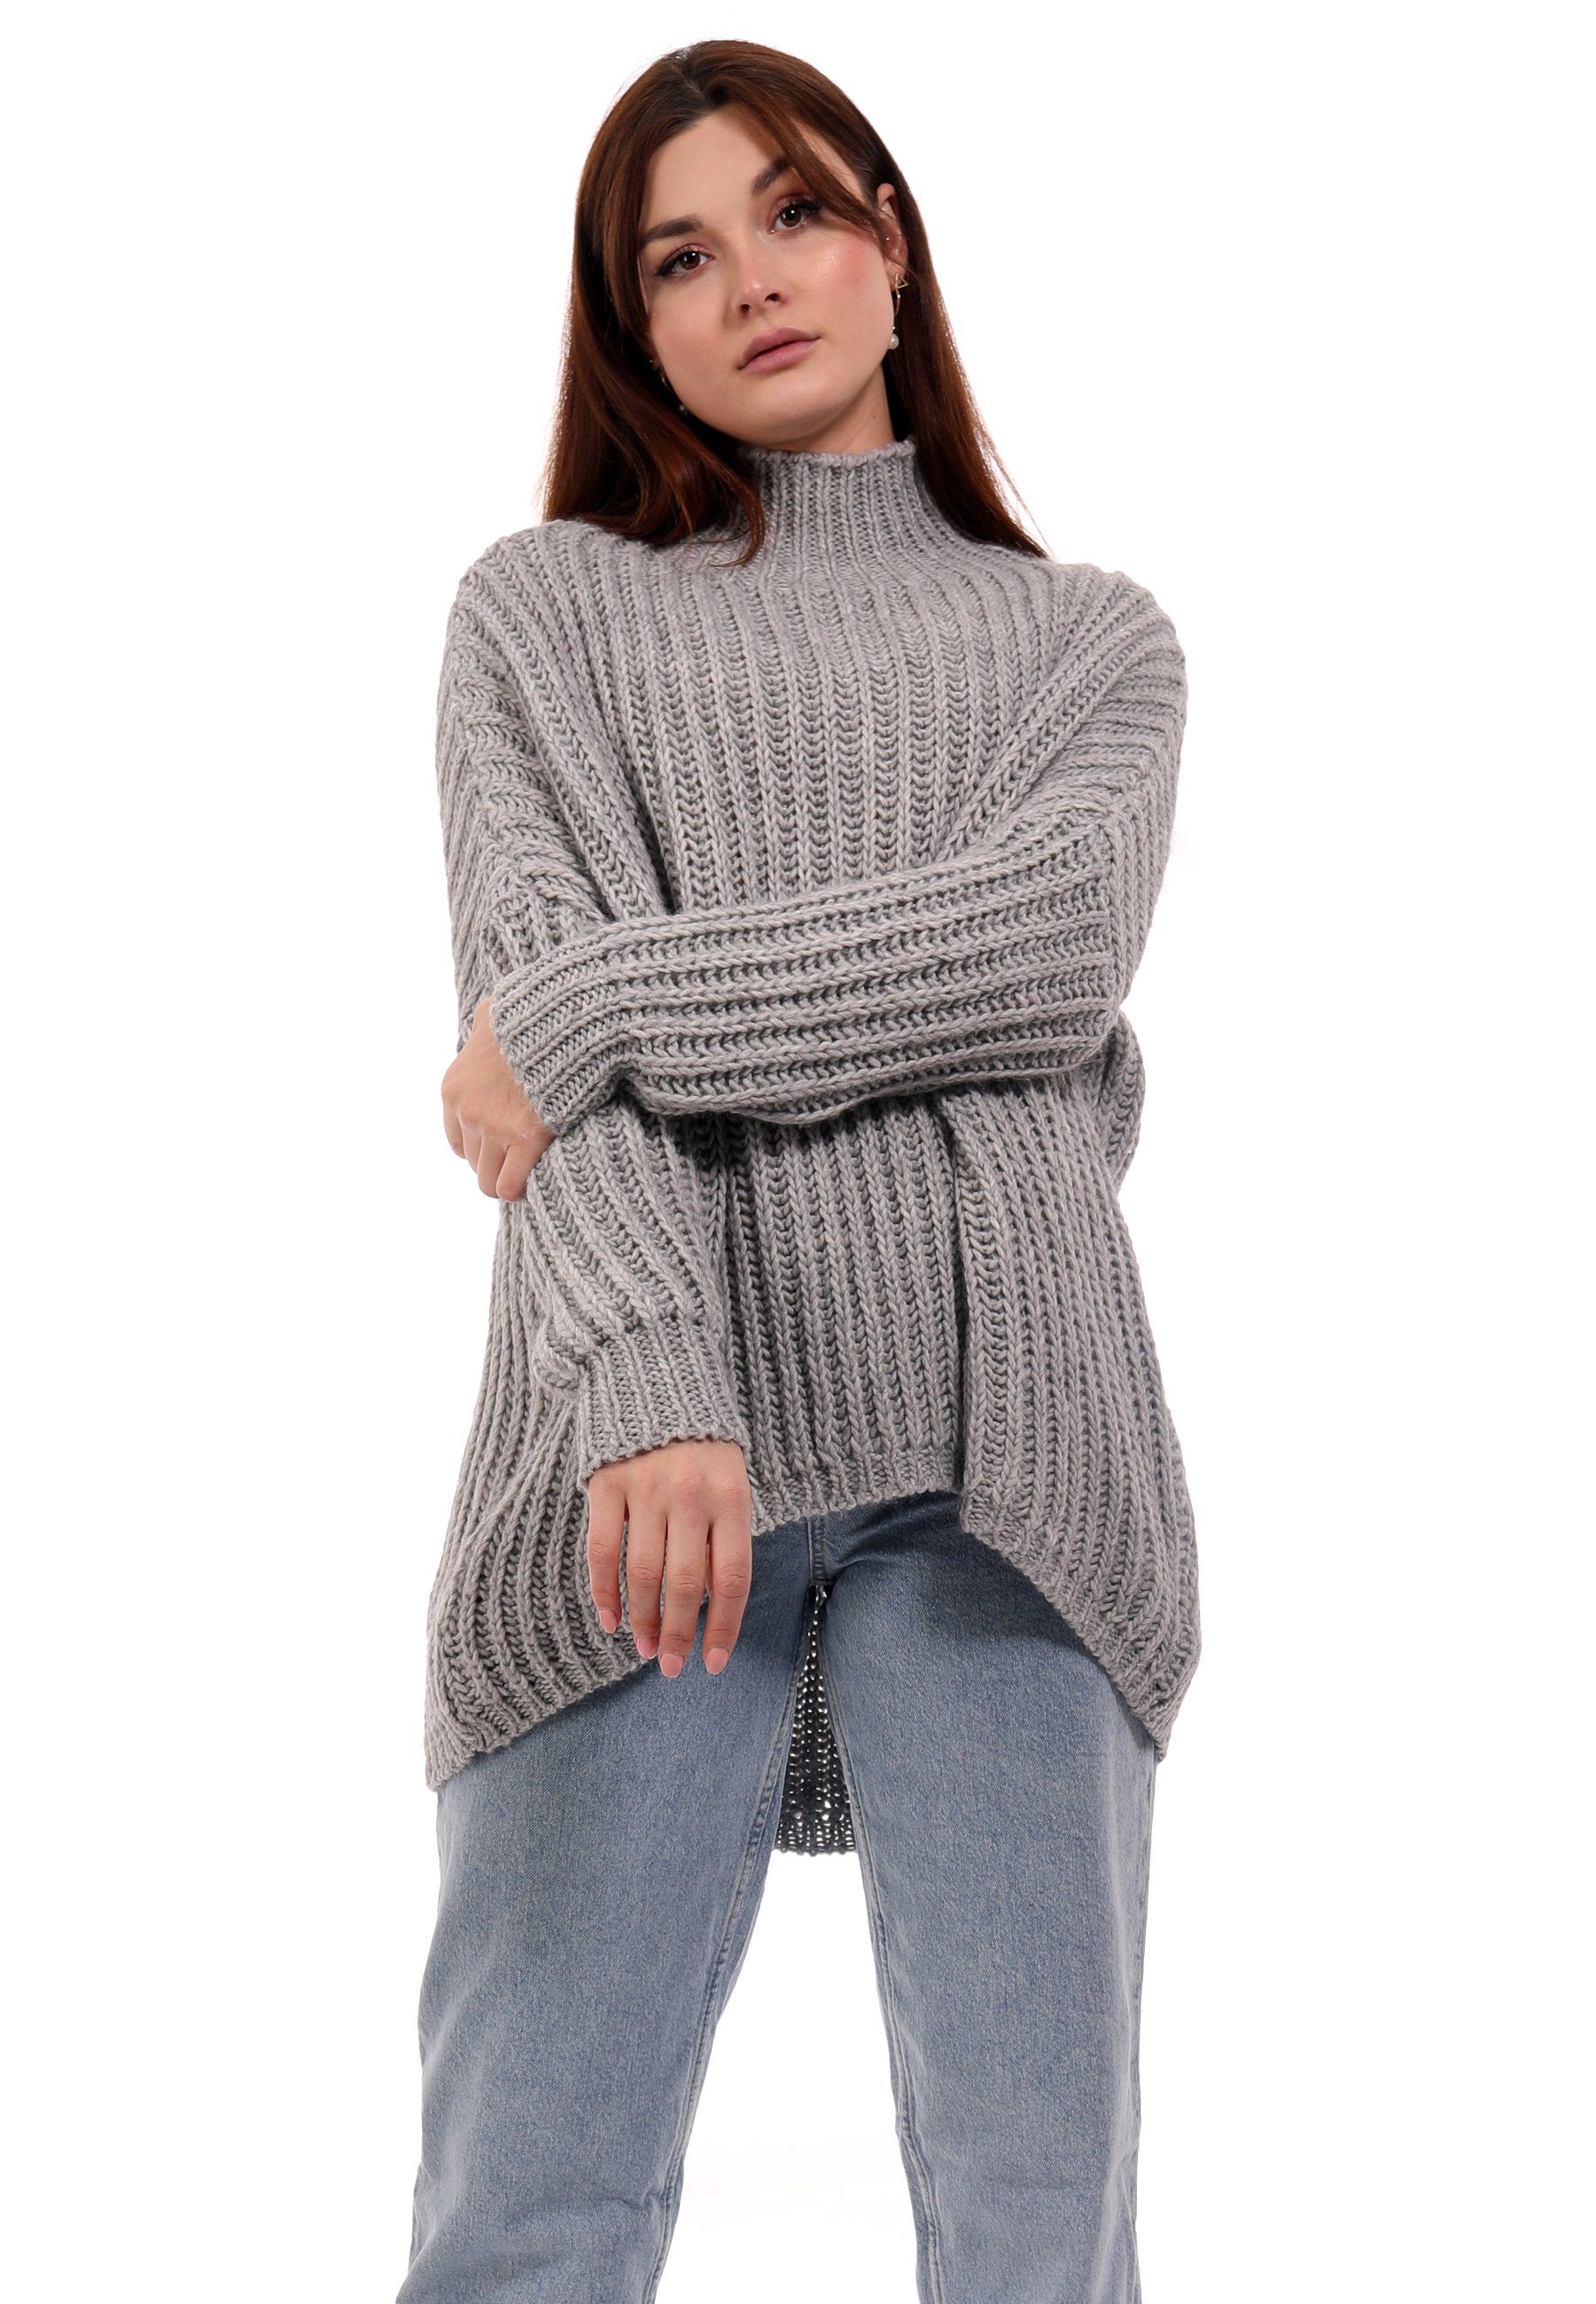 YC Fashion & Style Longpullover Oversized Pullover Grobstrick Vokuhila Sweater One Size (1-tlg) casual grau | Strickpullover